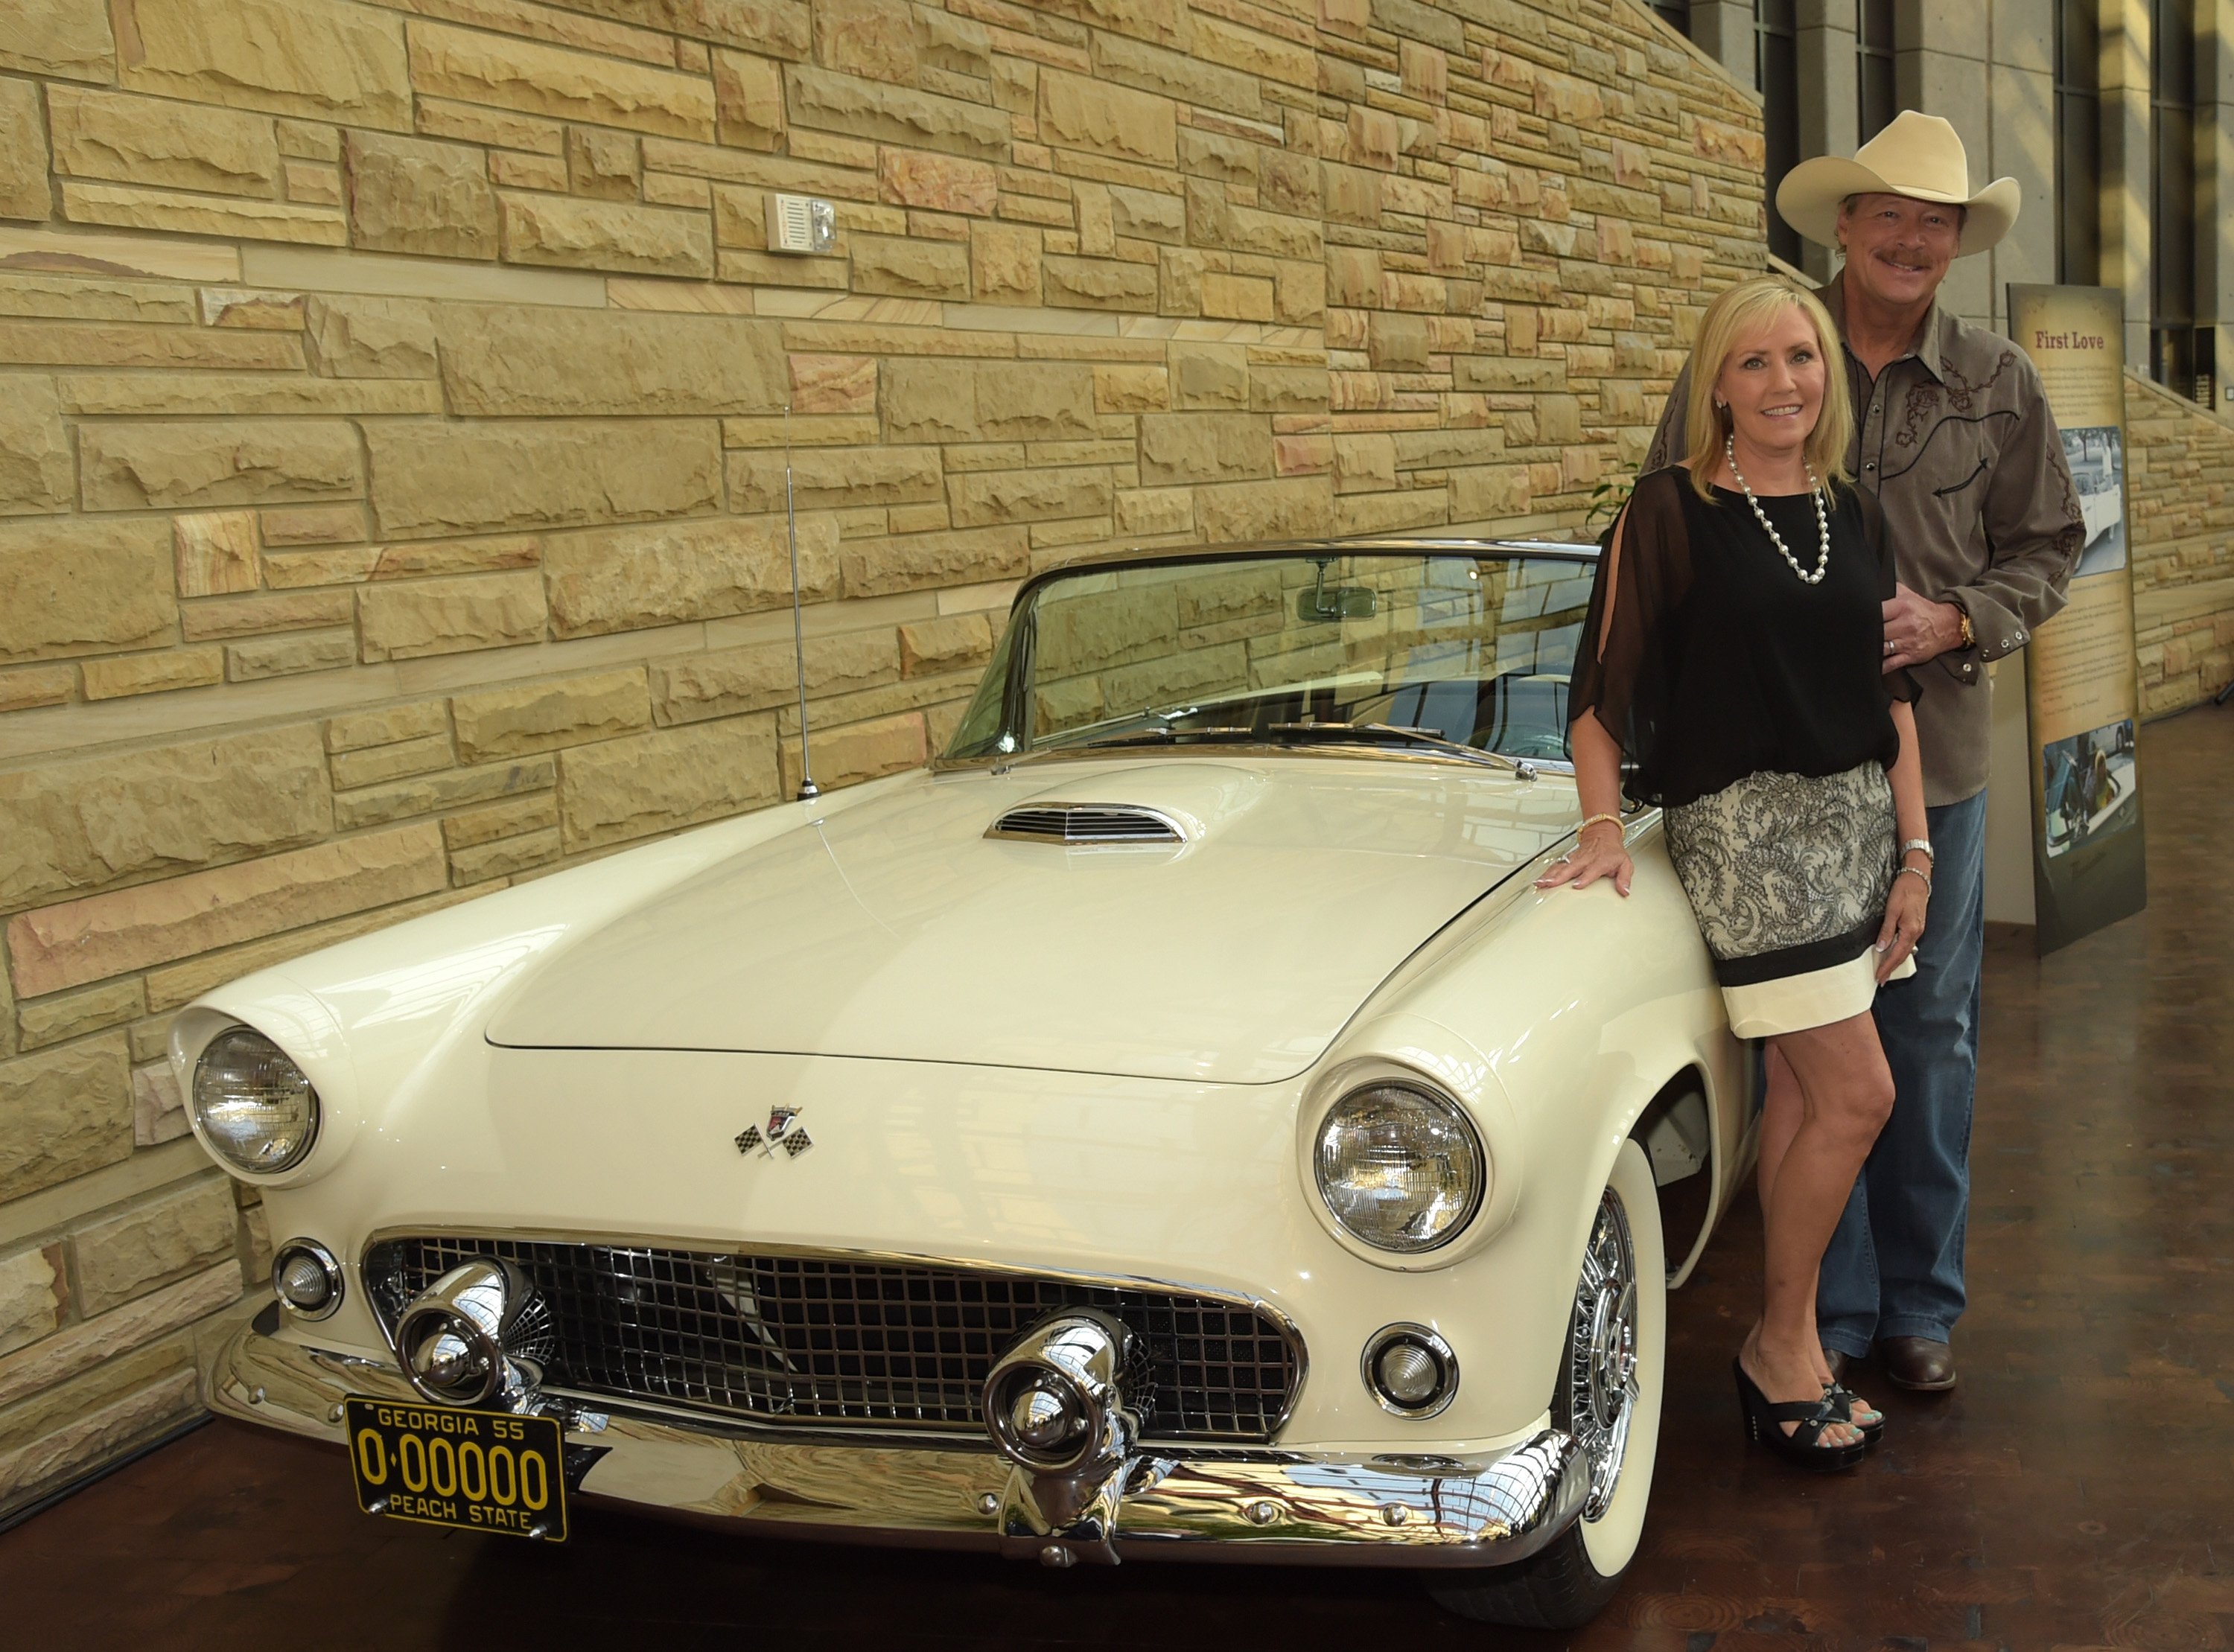 enise and Alan Jackson pose beside Jackson's 1955 Ford Thunderbird at the opening of his "Alan Jackson: 25 Years of Keepin' It Country" exhibit at the Country Music Hall of Fame and Museum on August 27, 2014 in Nashville, Tennessee | Source: Getty Images 